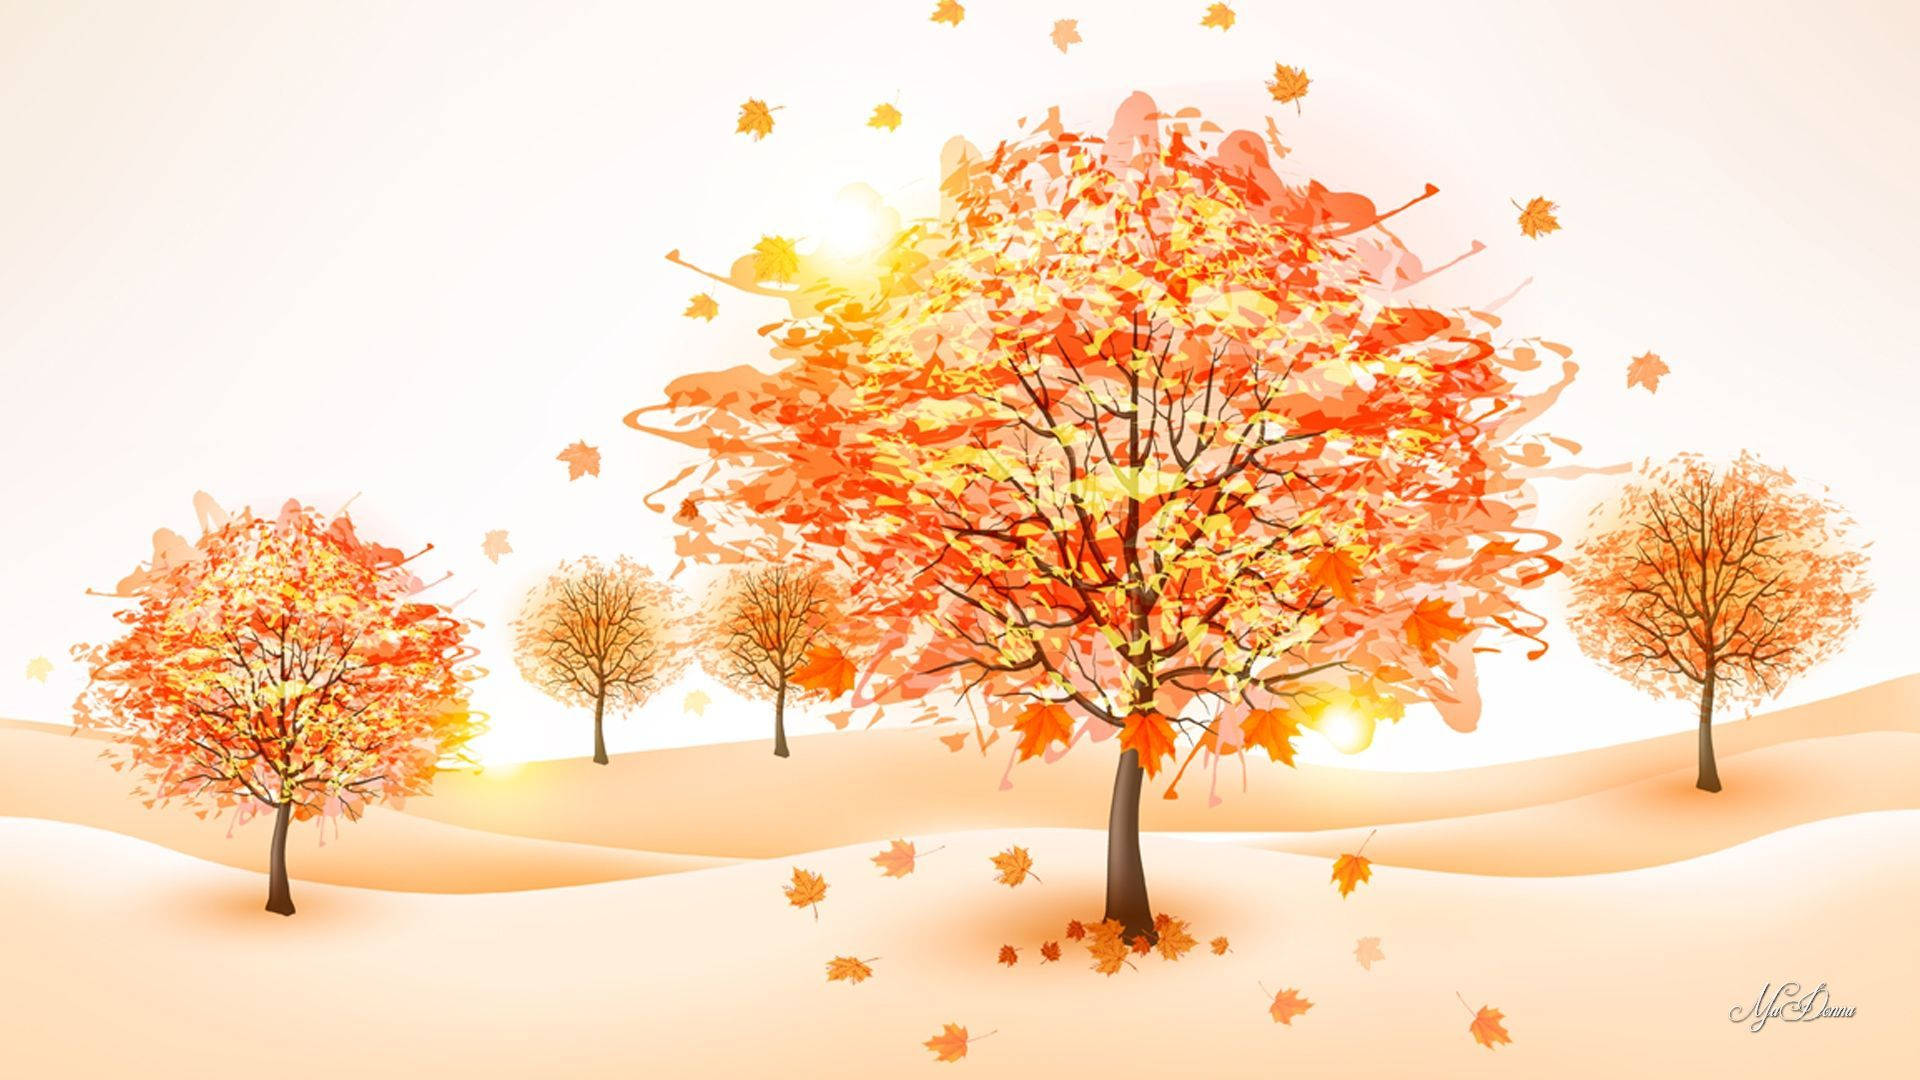 Celebrate the Beauty of October with this Adorable Image Wallpaper